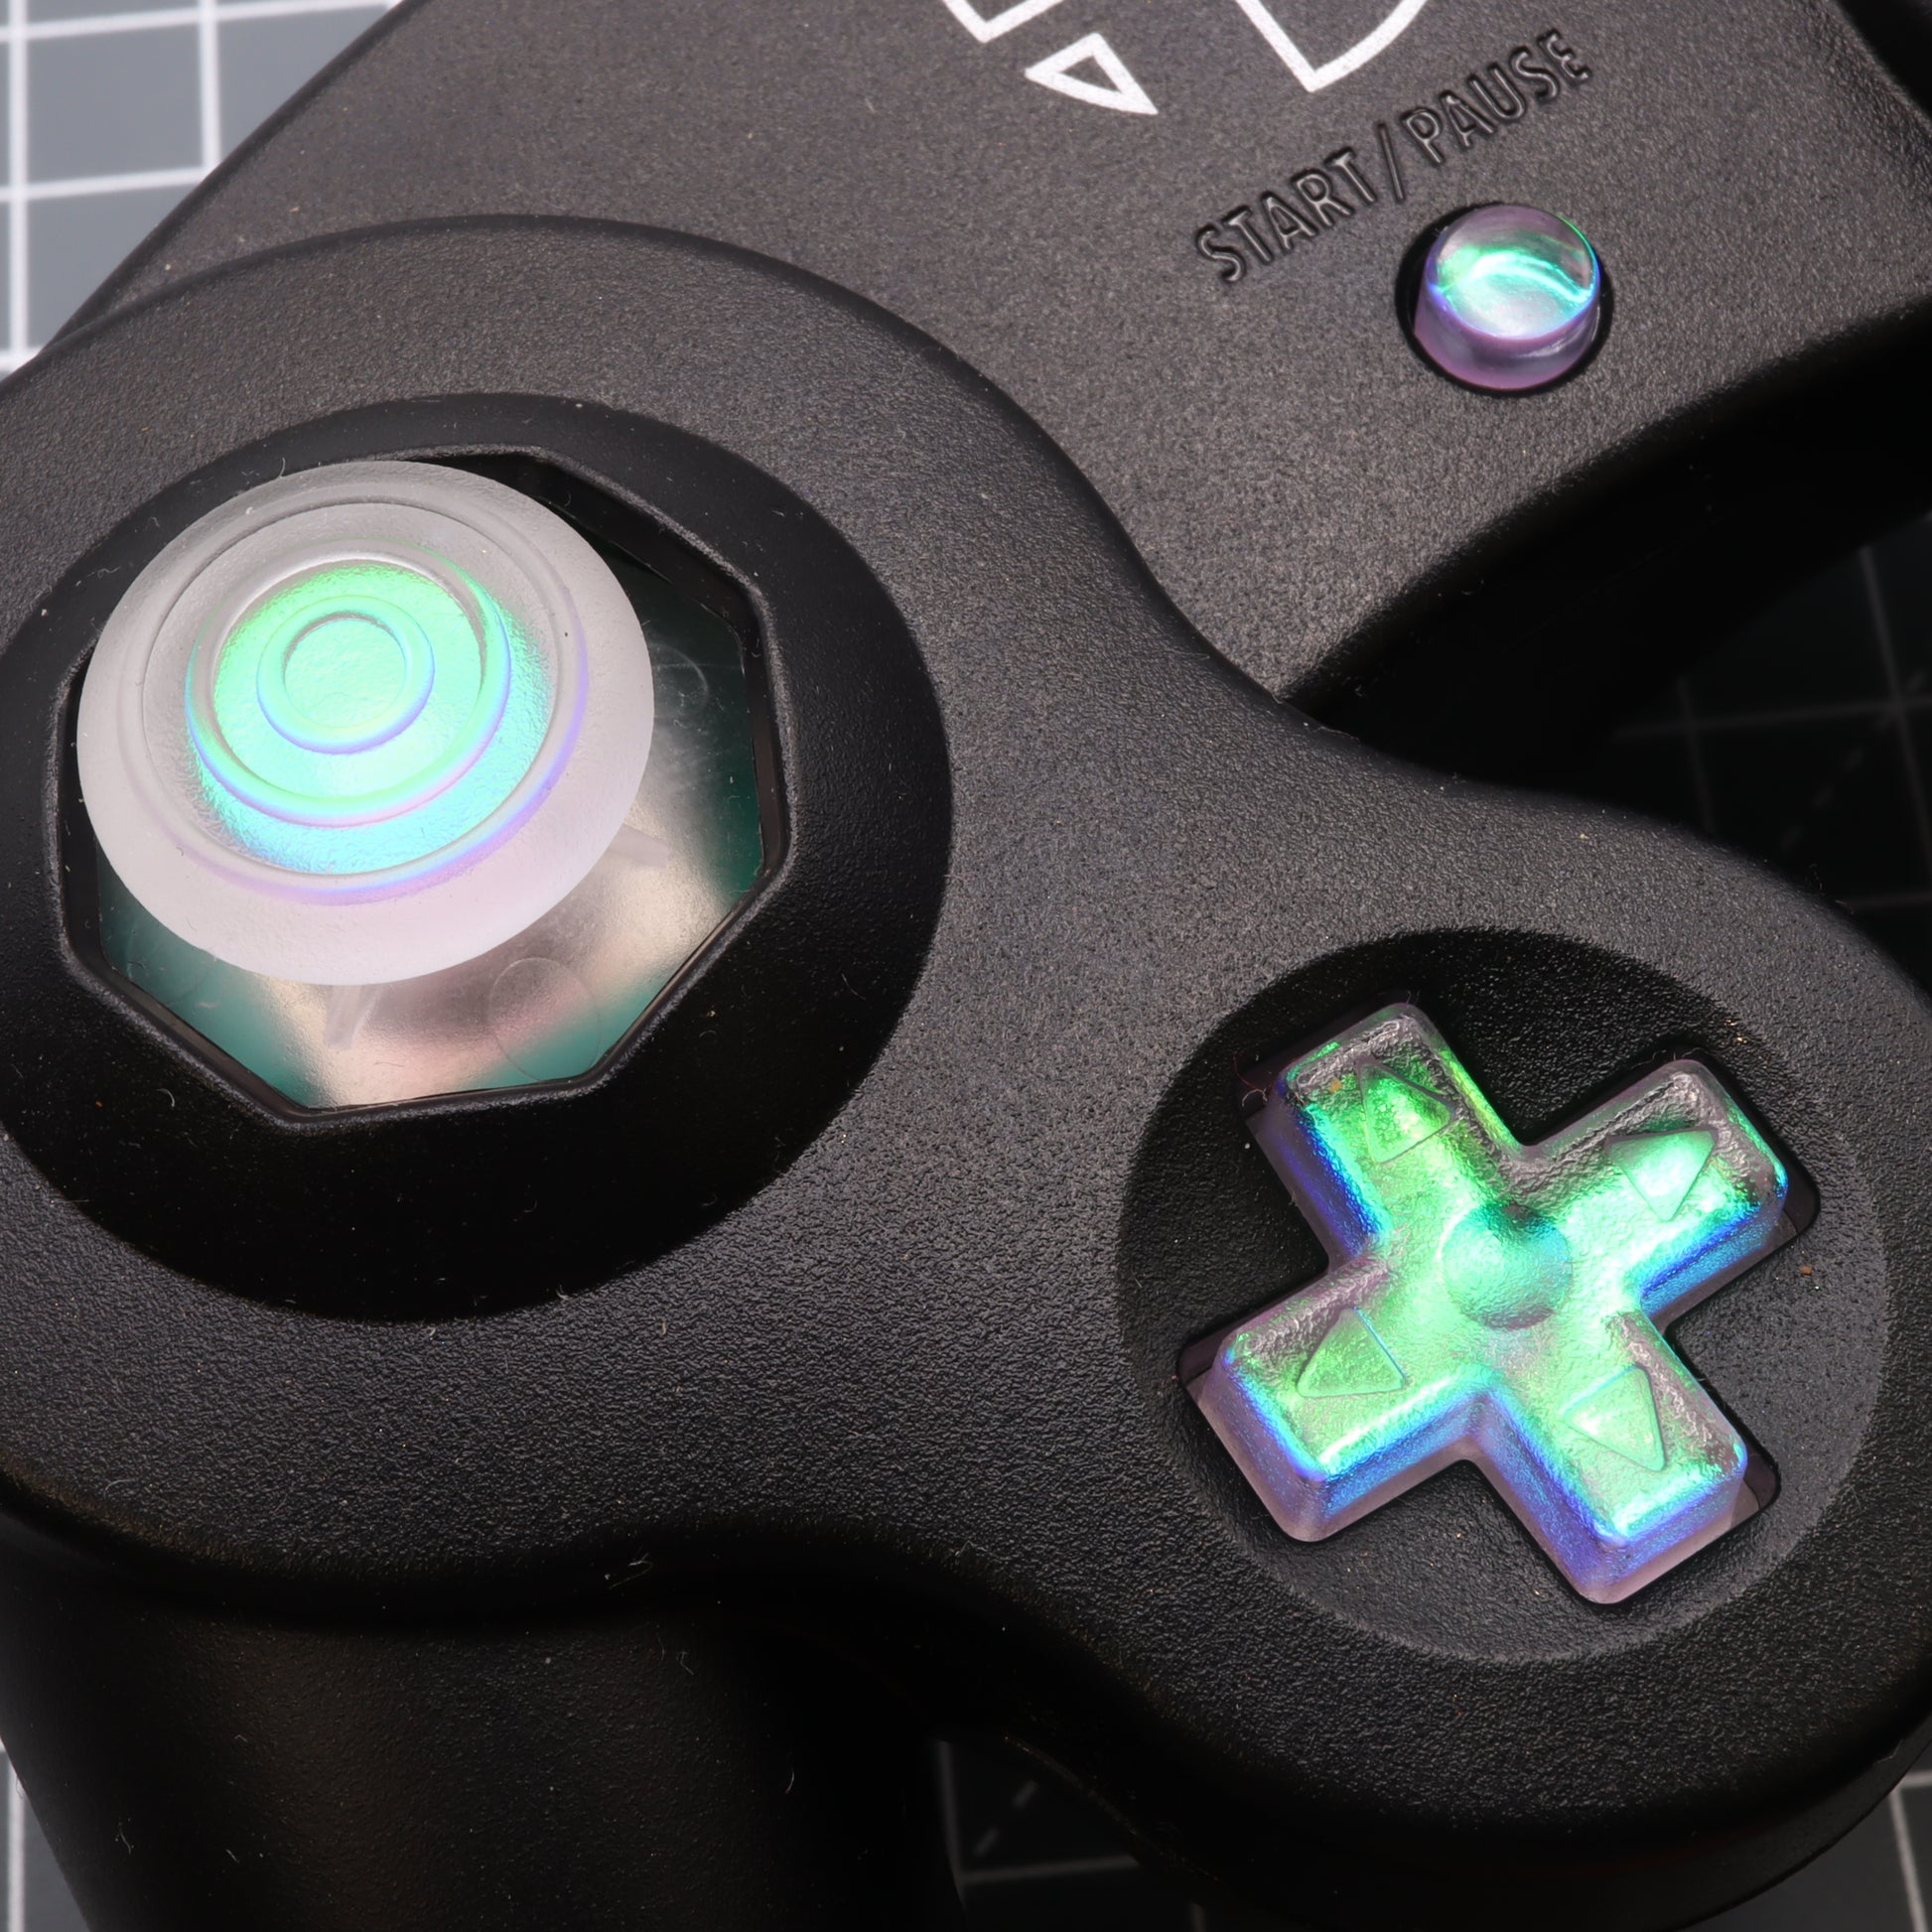 Close-up of a GameCube controller with an illuminated analog stick and a green, glowing dichroic effect.